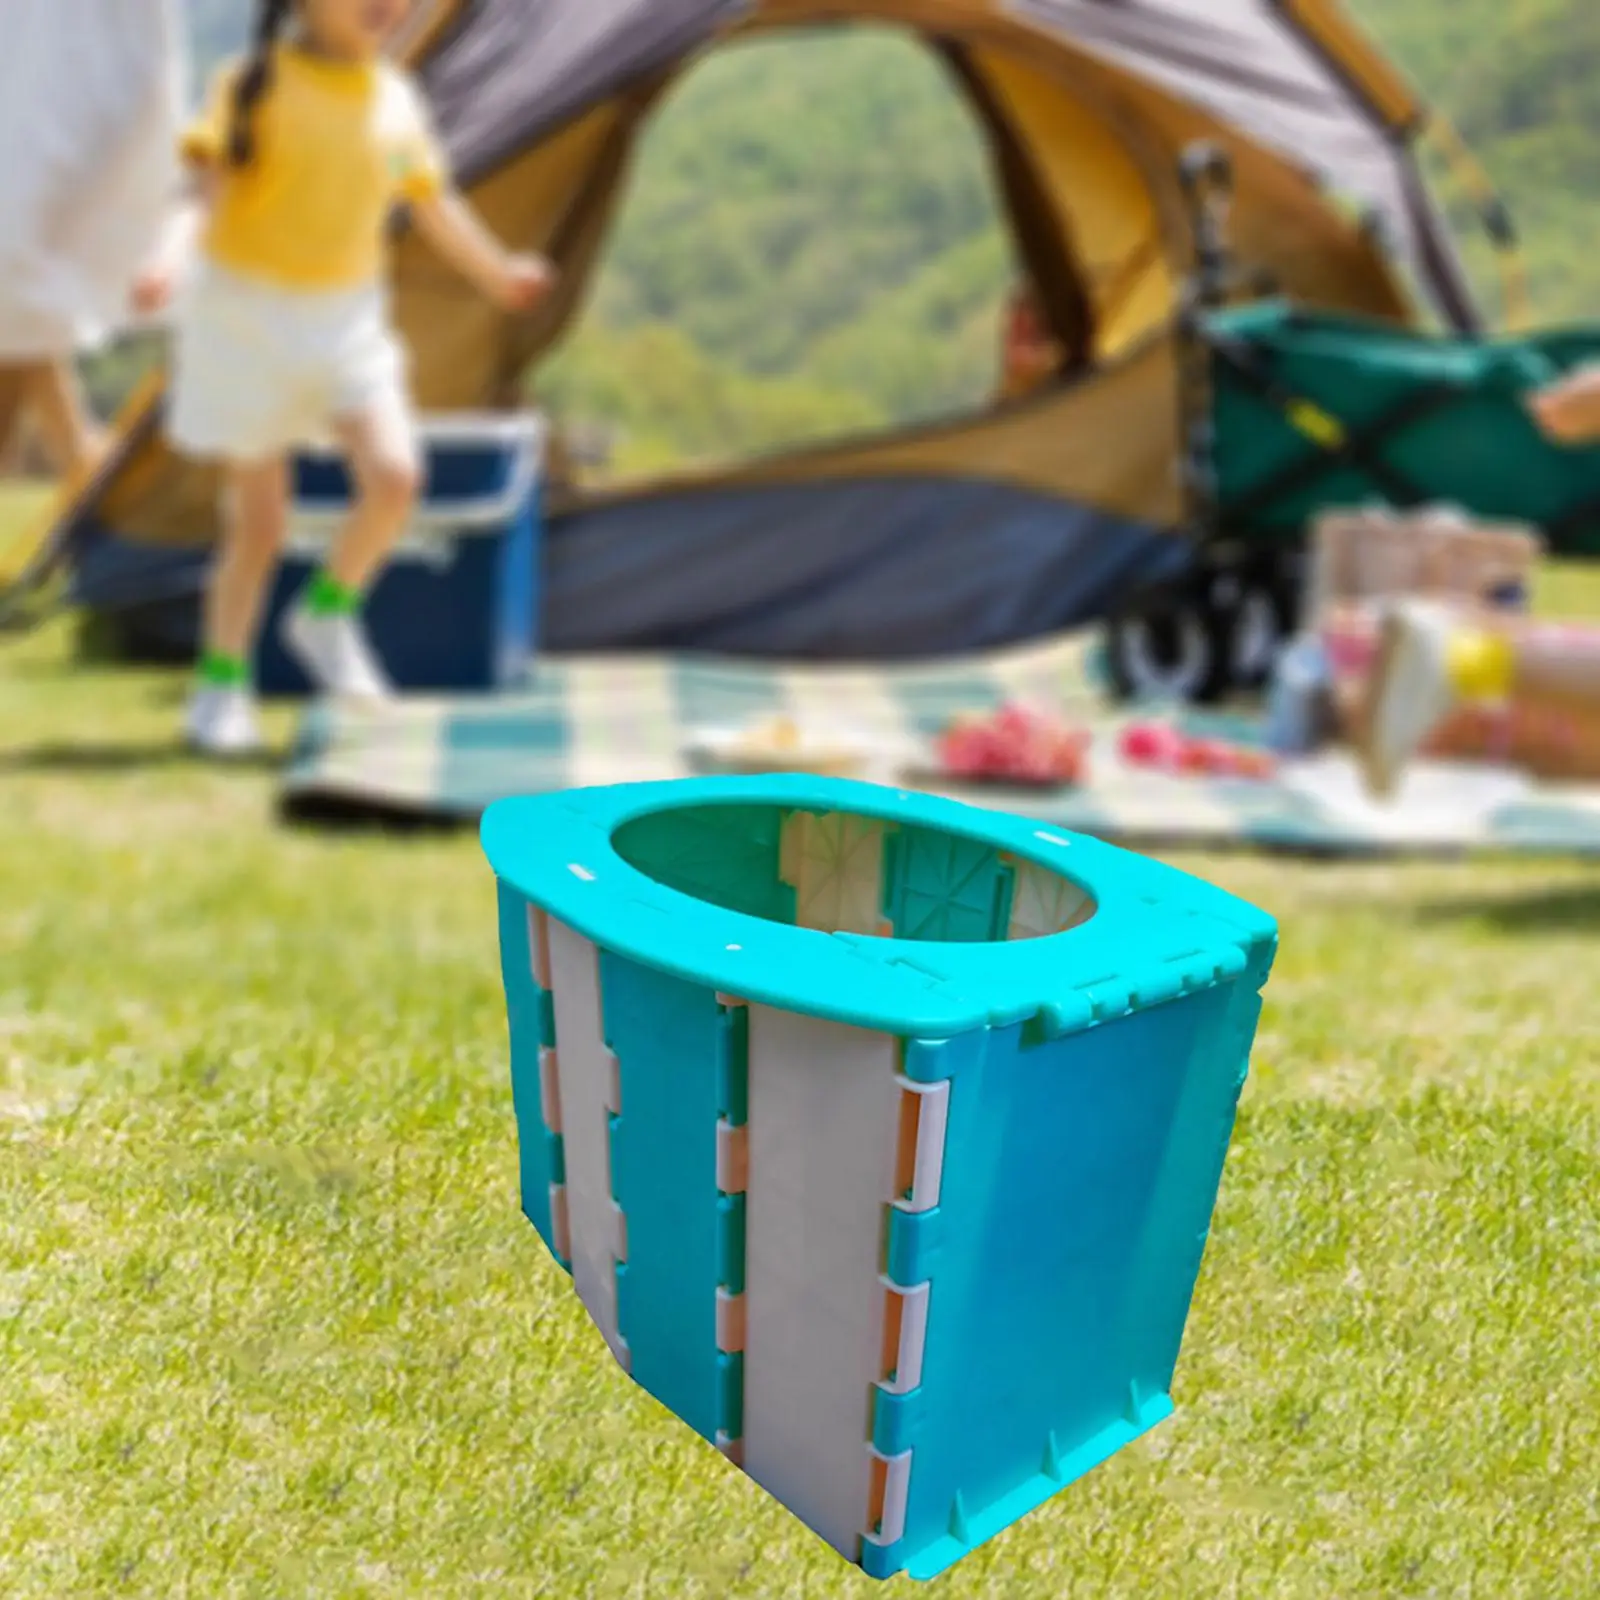 Portable Toilet Collapsible Travel Toilet Multifunctional Compact Folding Camping Toilet for Traffic Outdoor Home Car Travel